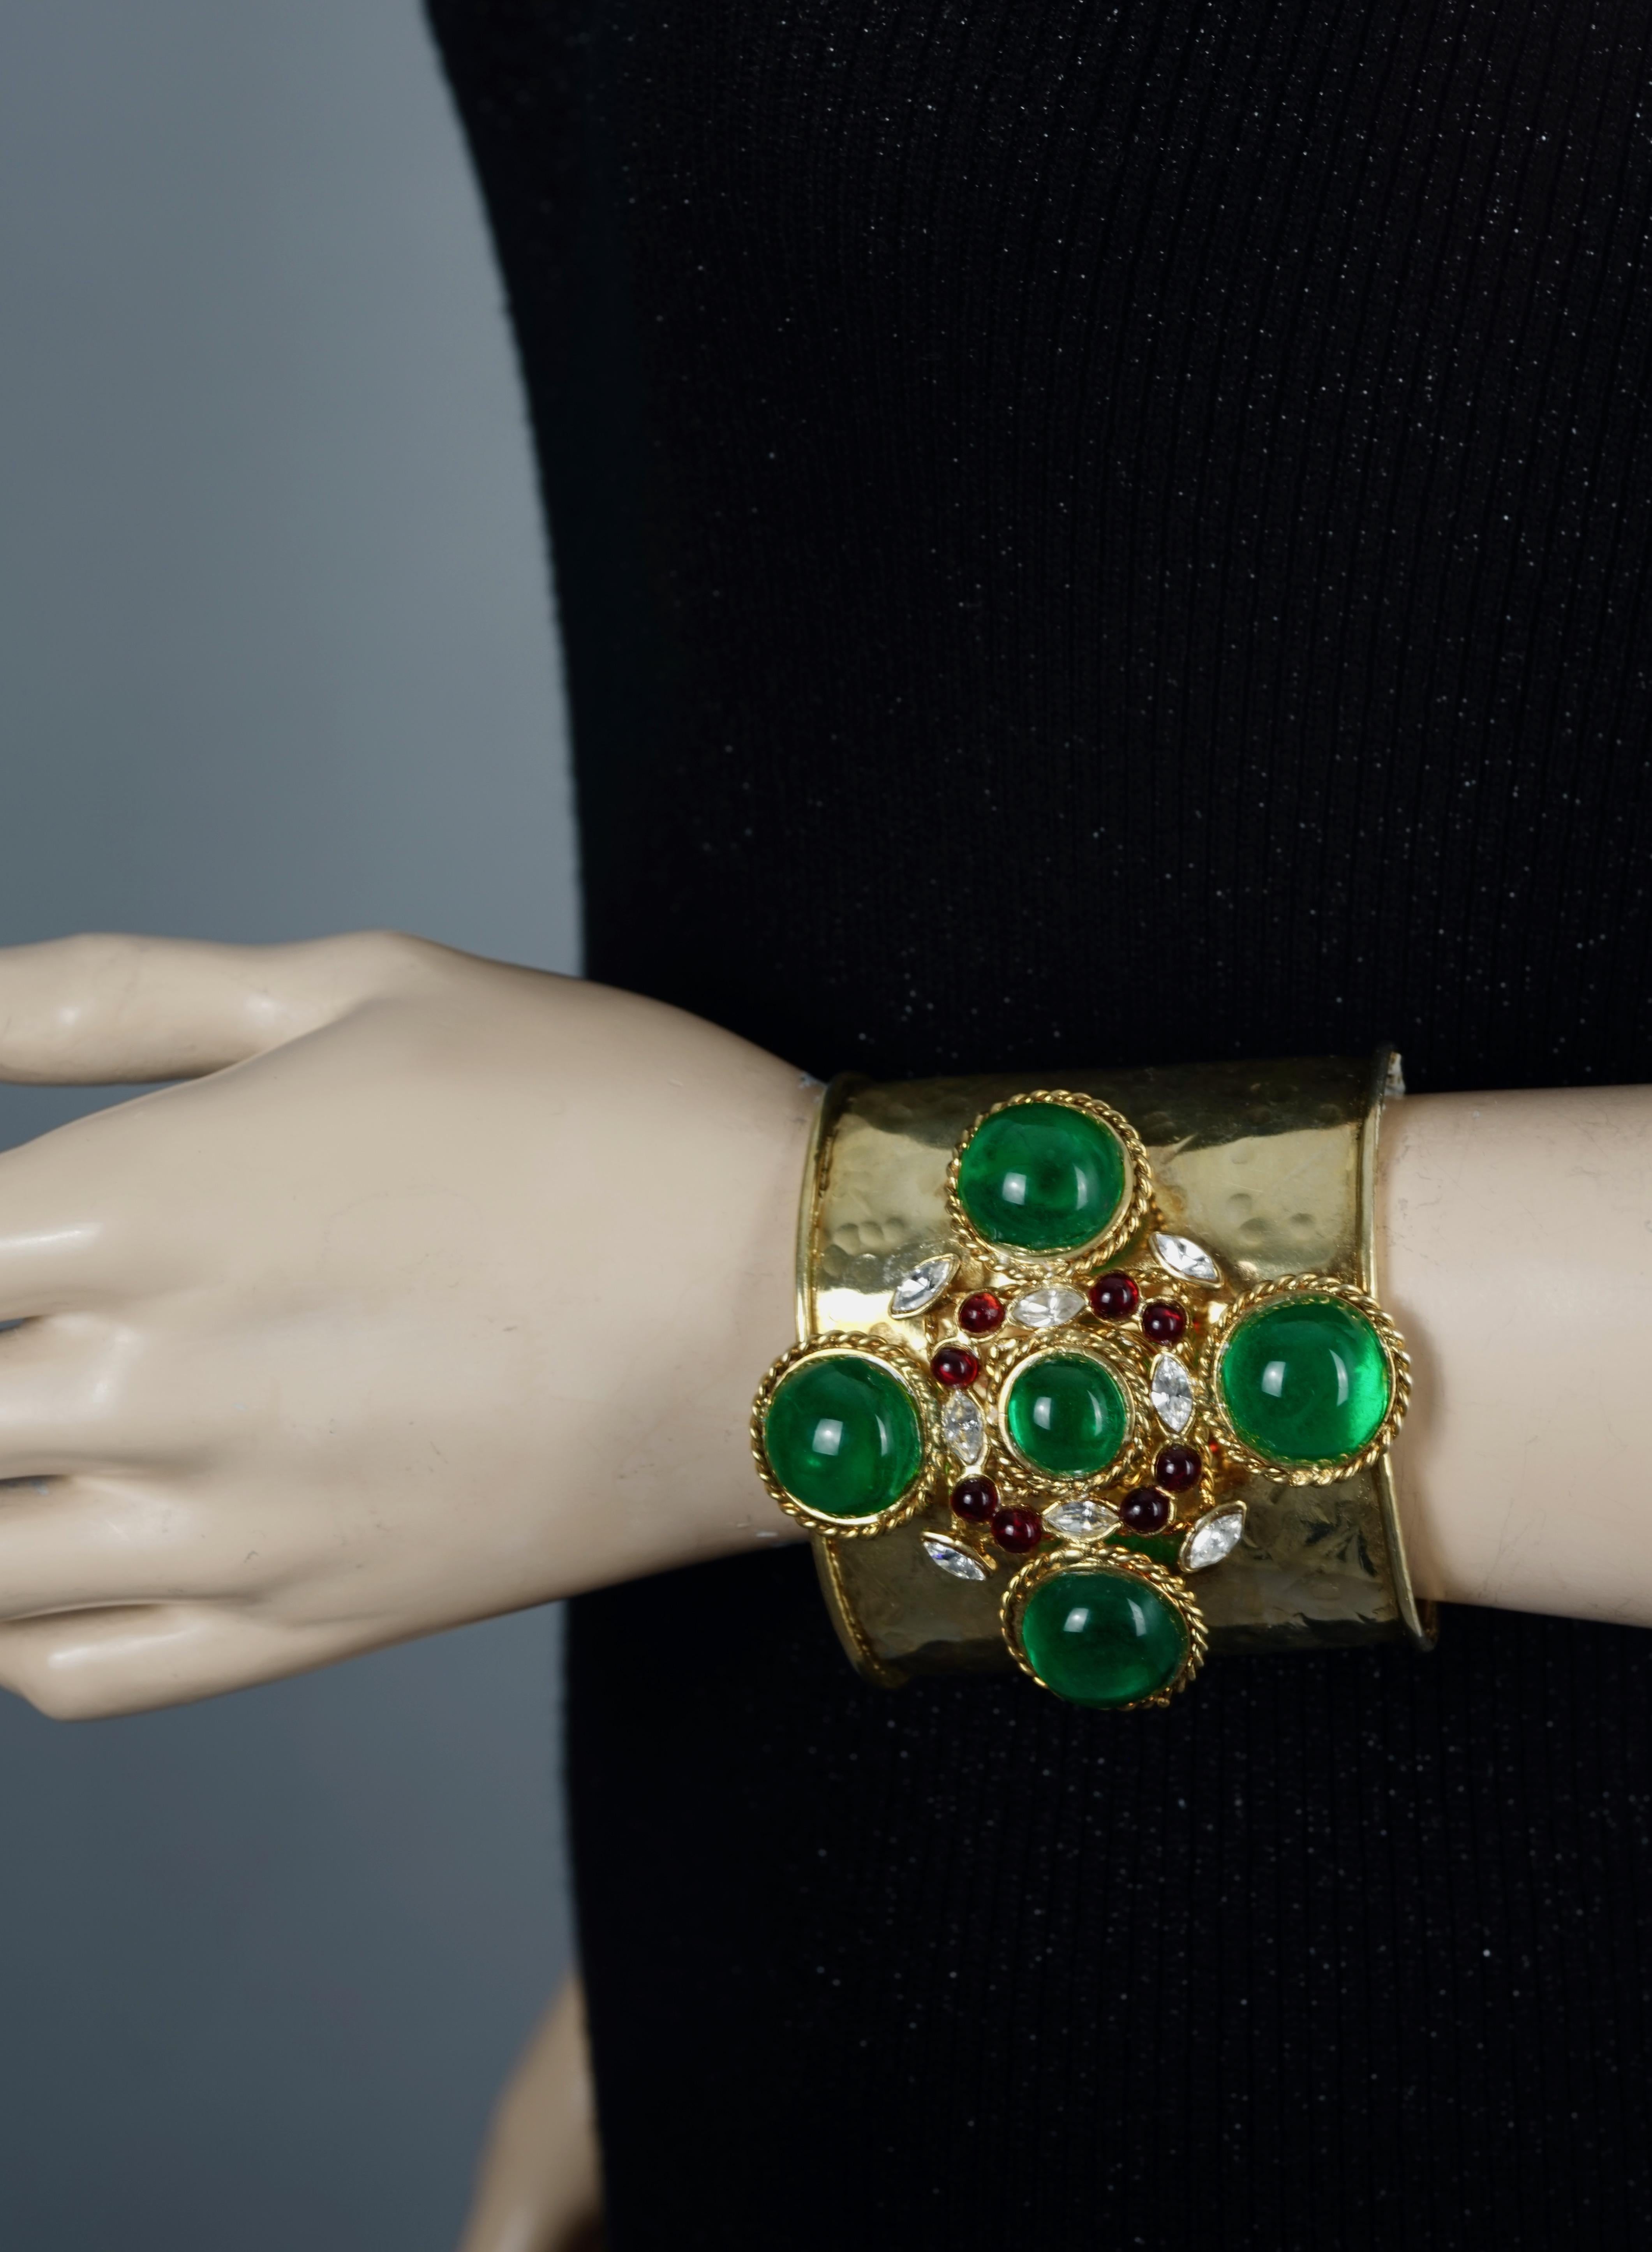 Vintage Gripoix Byzantine Haute Couture Cuff Bracelet

Measurements:
Height: 3 2/8 inches
Inner Diameter: 2 4/8 inches (across)
Opening: 1 3/8 inches

Features:
- Hammered cuff in Byzantine style.
- Cross center part is embellished with green, red